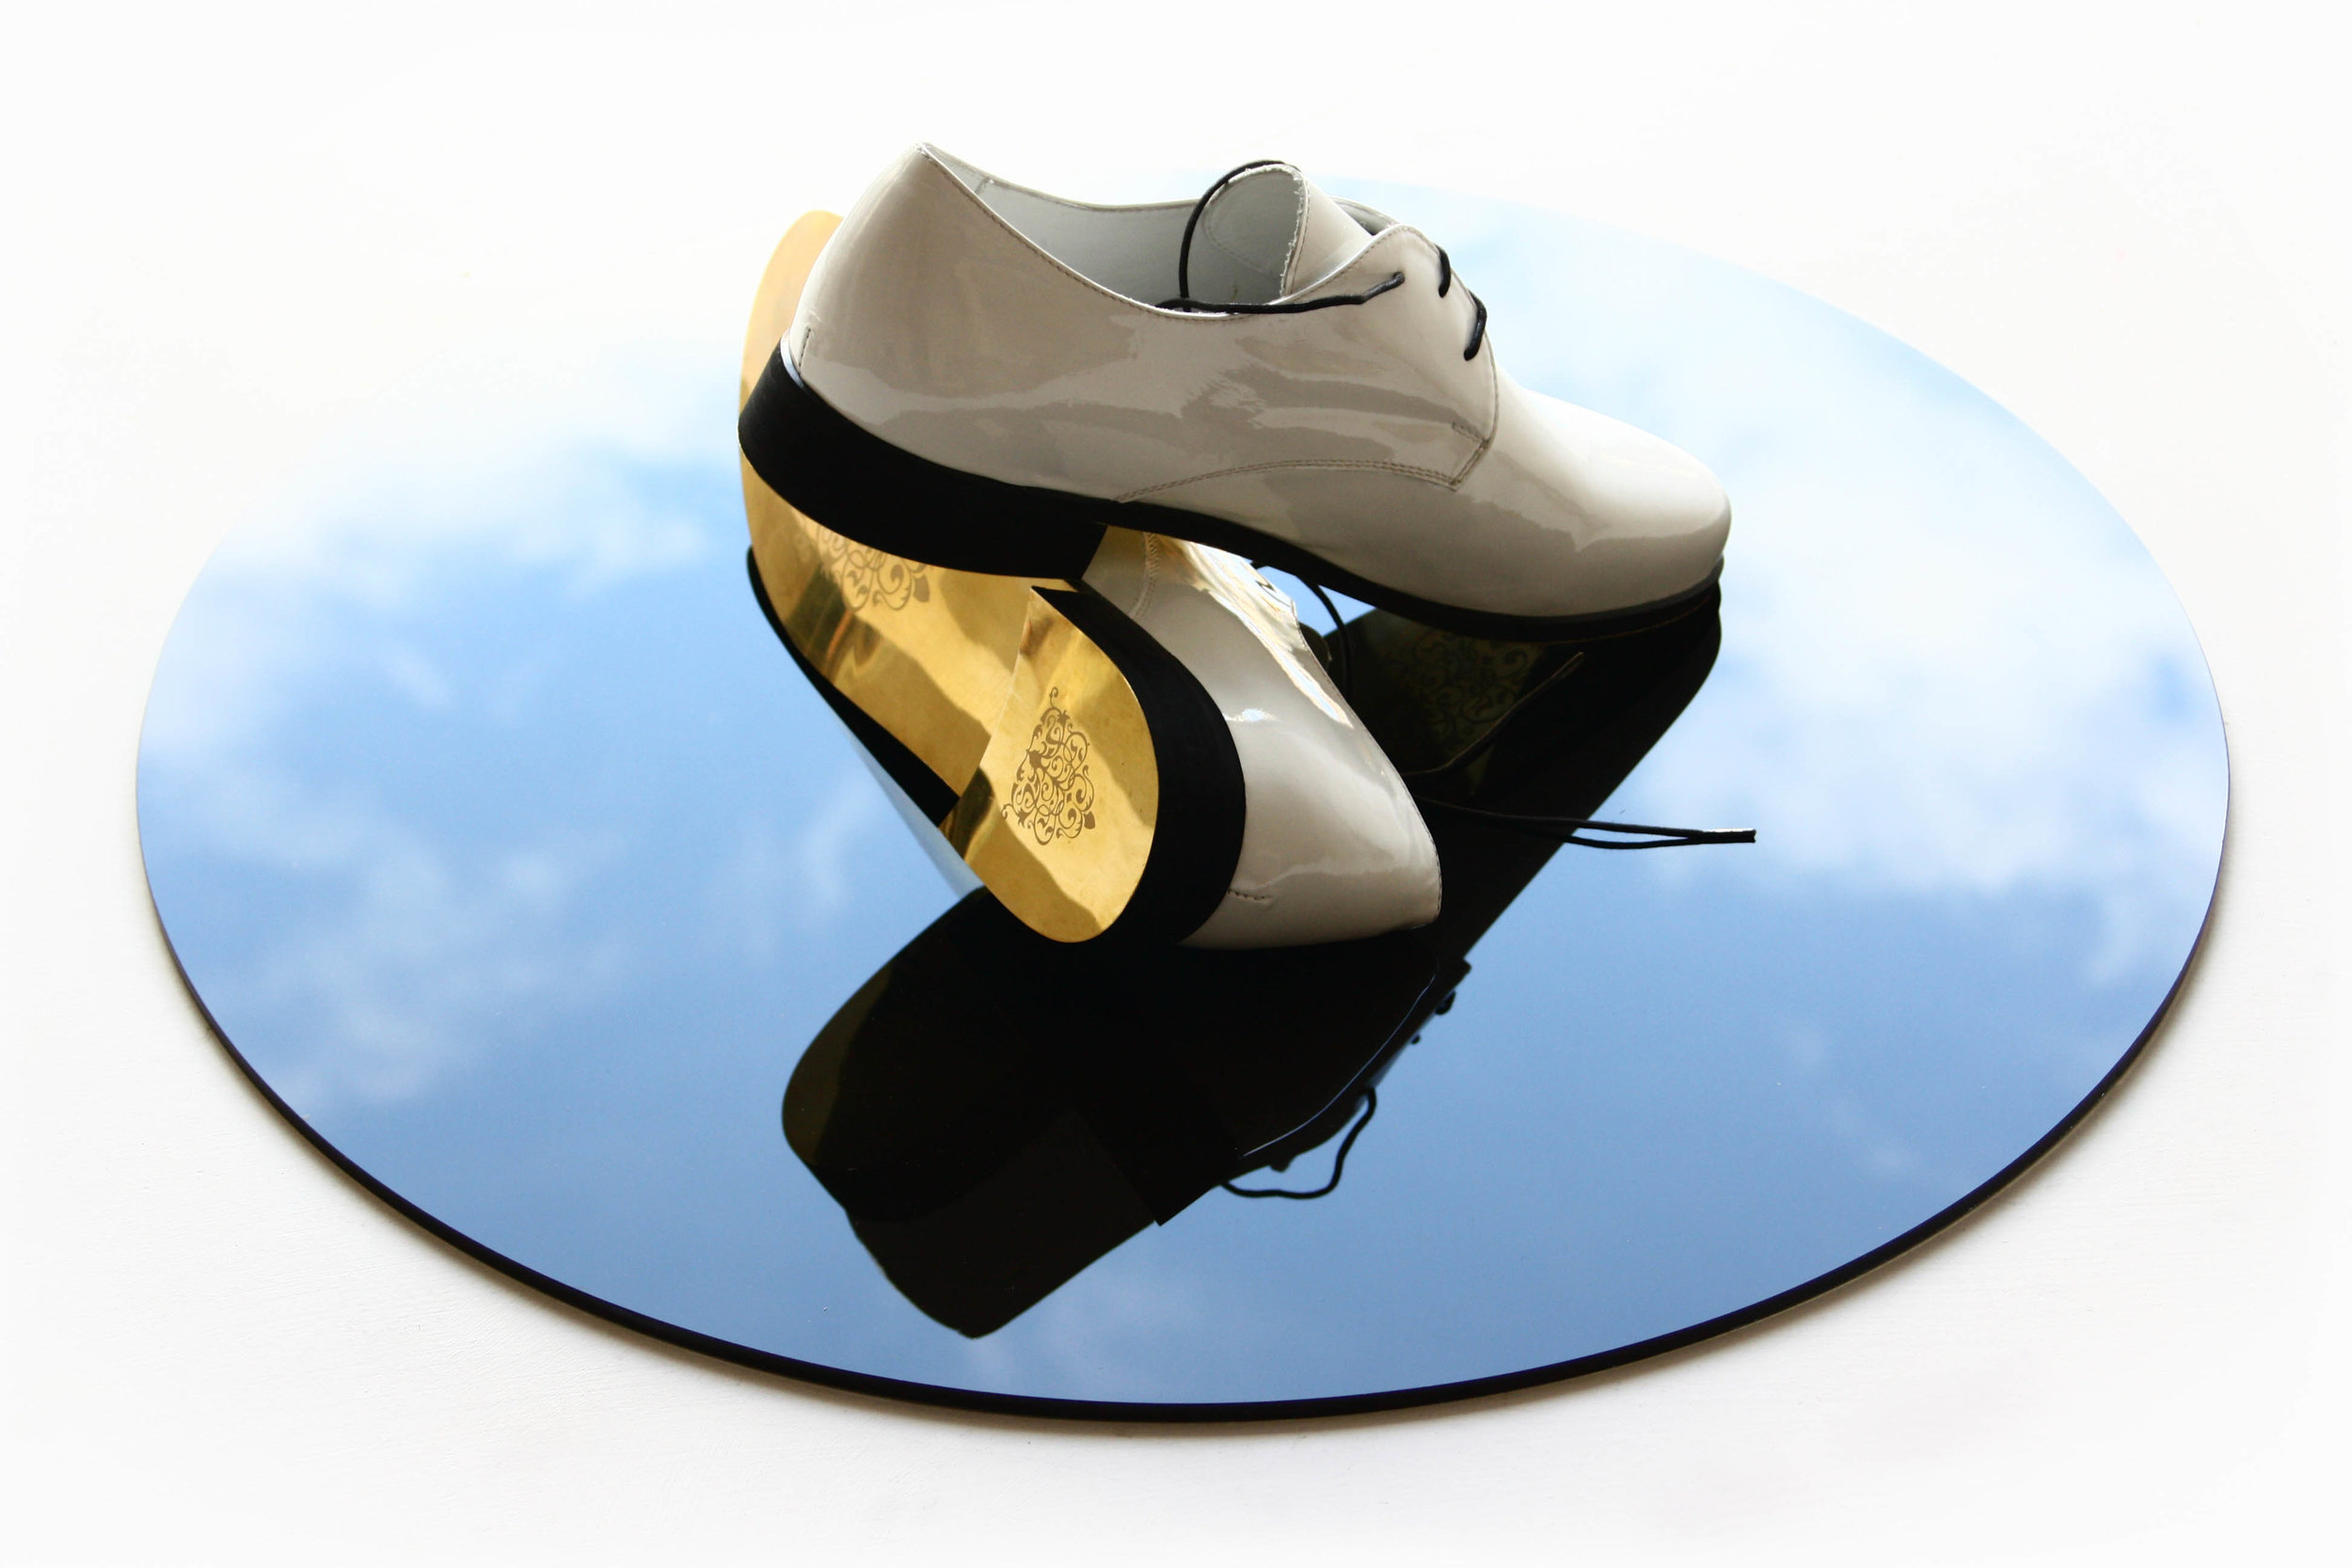 GOLDEN SHOES FOR GOLDEN ROUTES (2010) engraved bronze, leather, lacquer, black glass, 20 x 55 x 55 cm